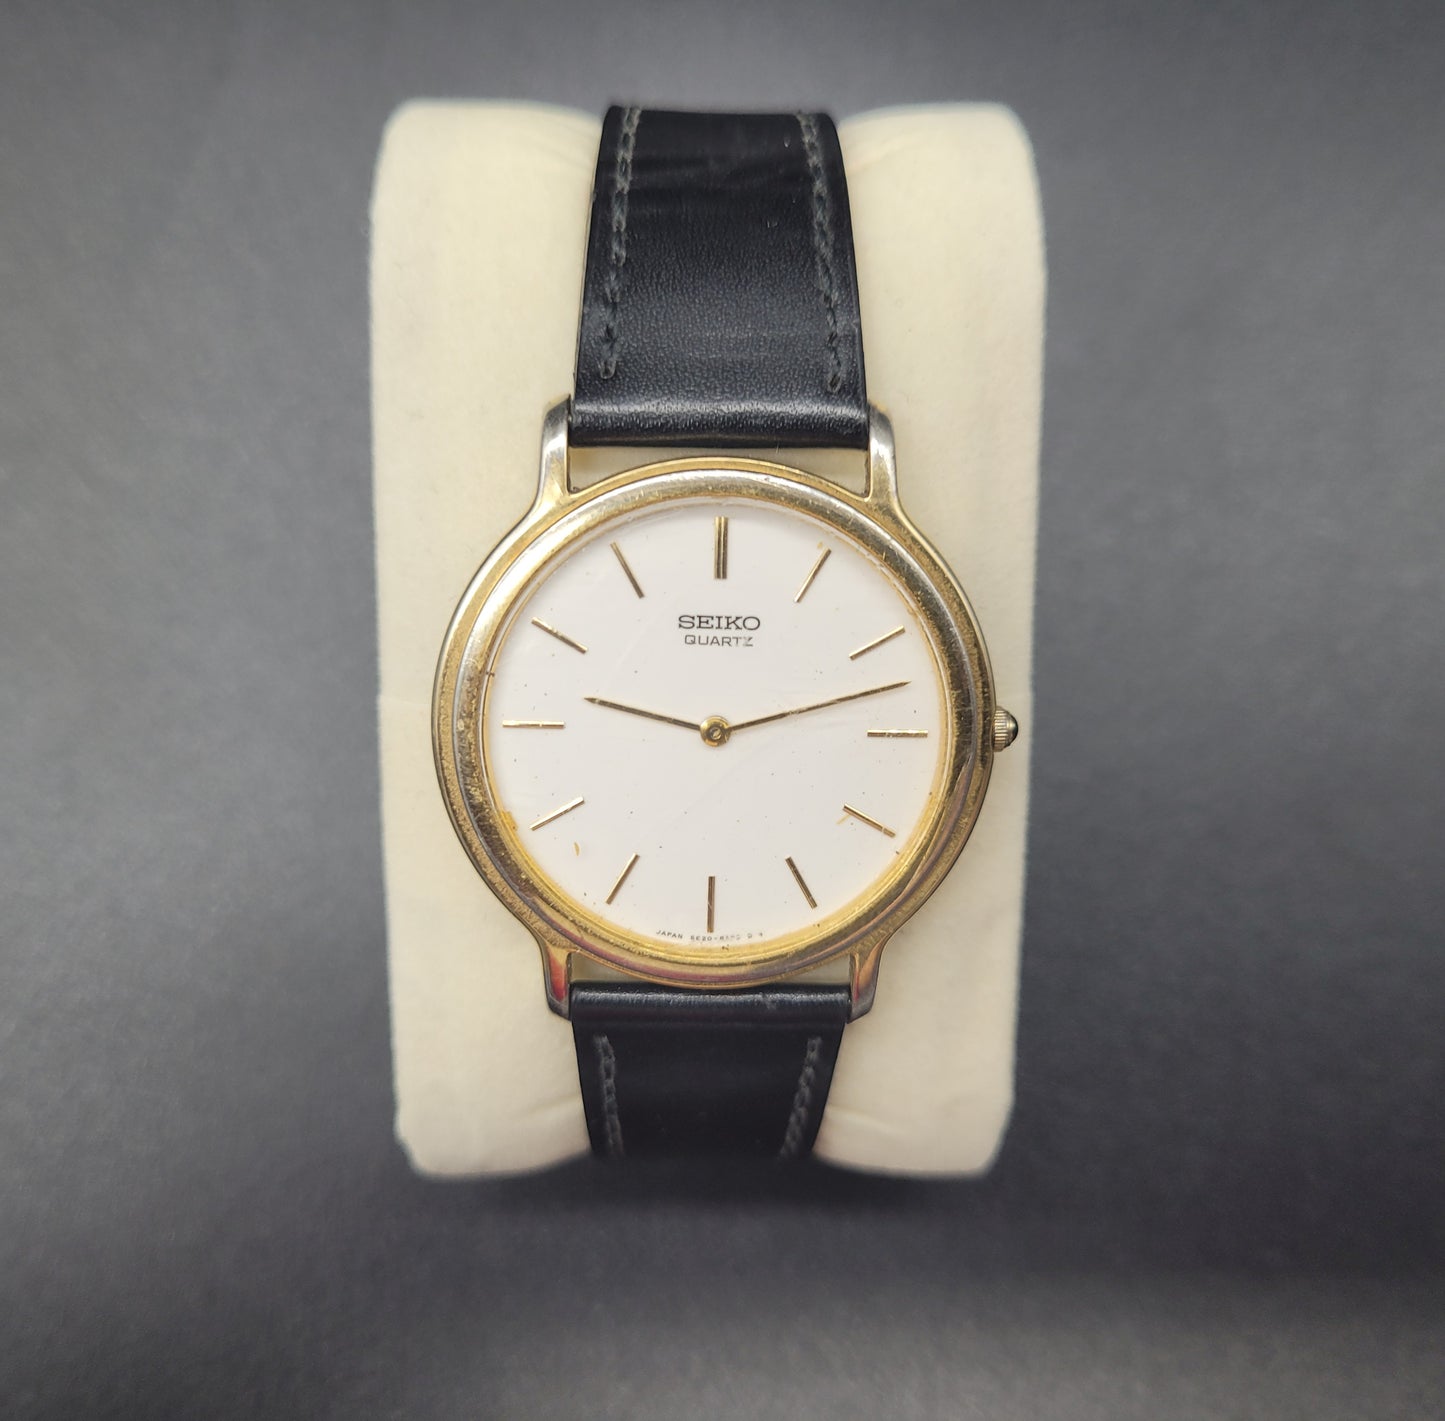 Vintage SEIKO Mens Watch for sale Gold Plated White Dial